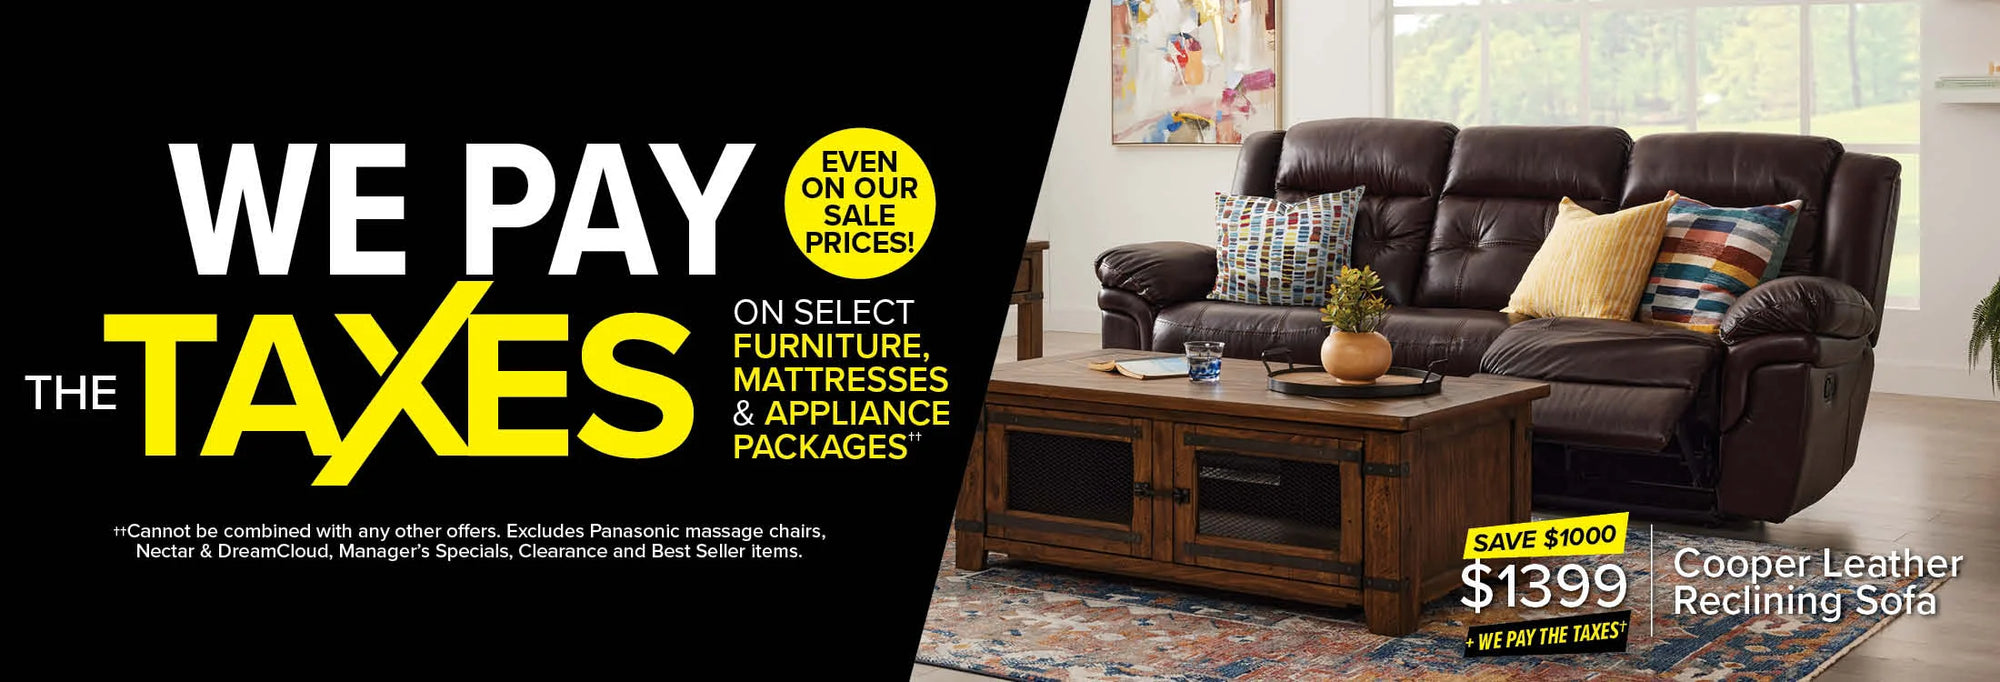 We Pay The Taxes on select furniture, mattresses & appliance packages, even on our sale prices! Cannot be combined with other offers. Excludes Panasonic, Dreamcloud, Nectar, Best Seller and Clearance items.